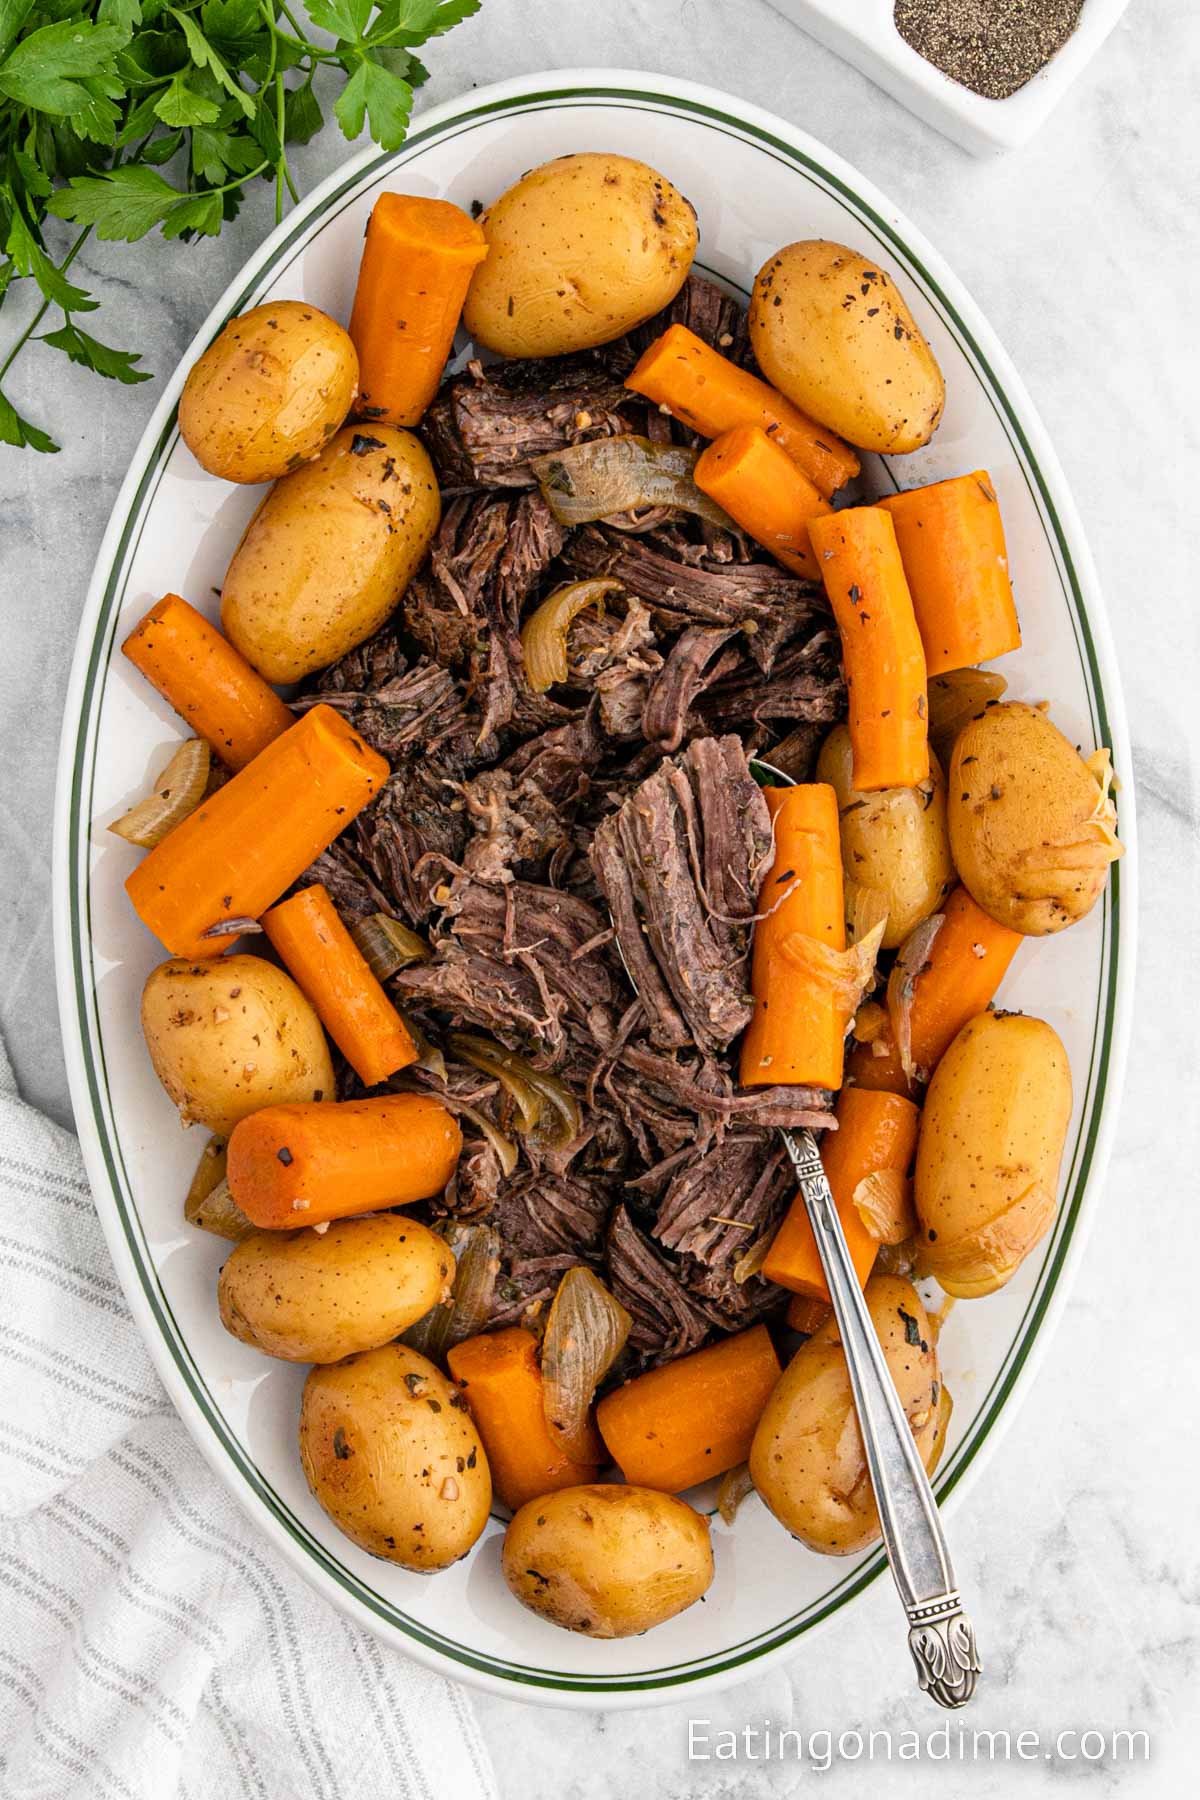 Pot Roast with carrots and potatoes on a serving platter